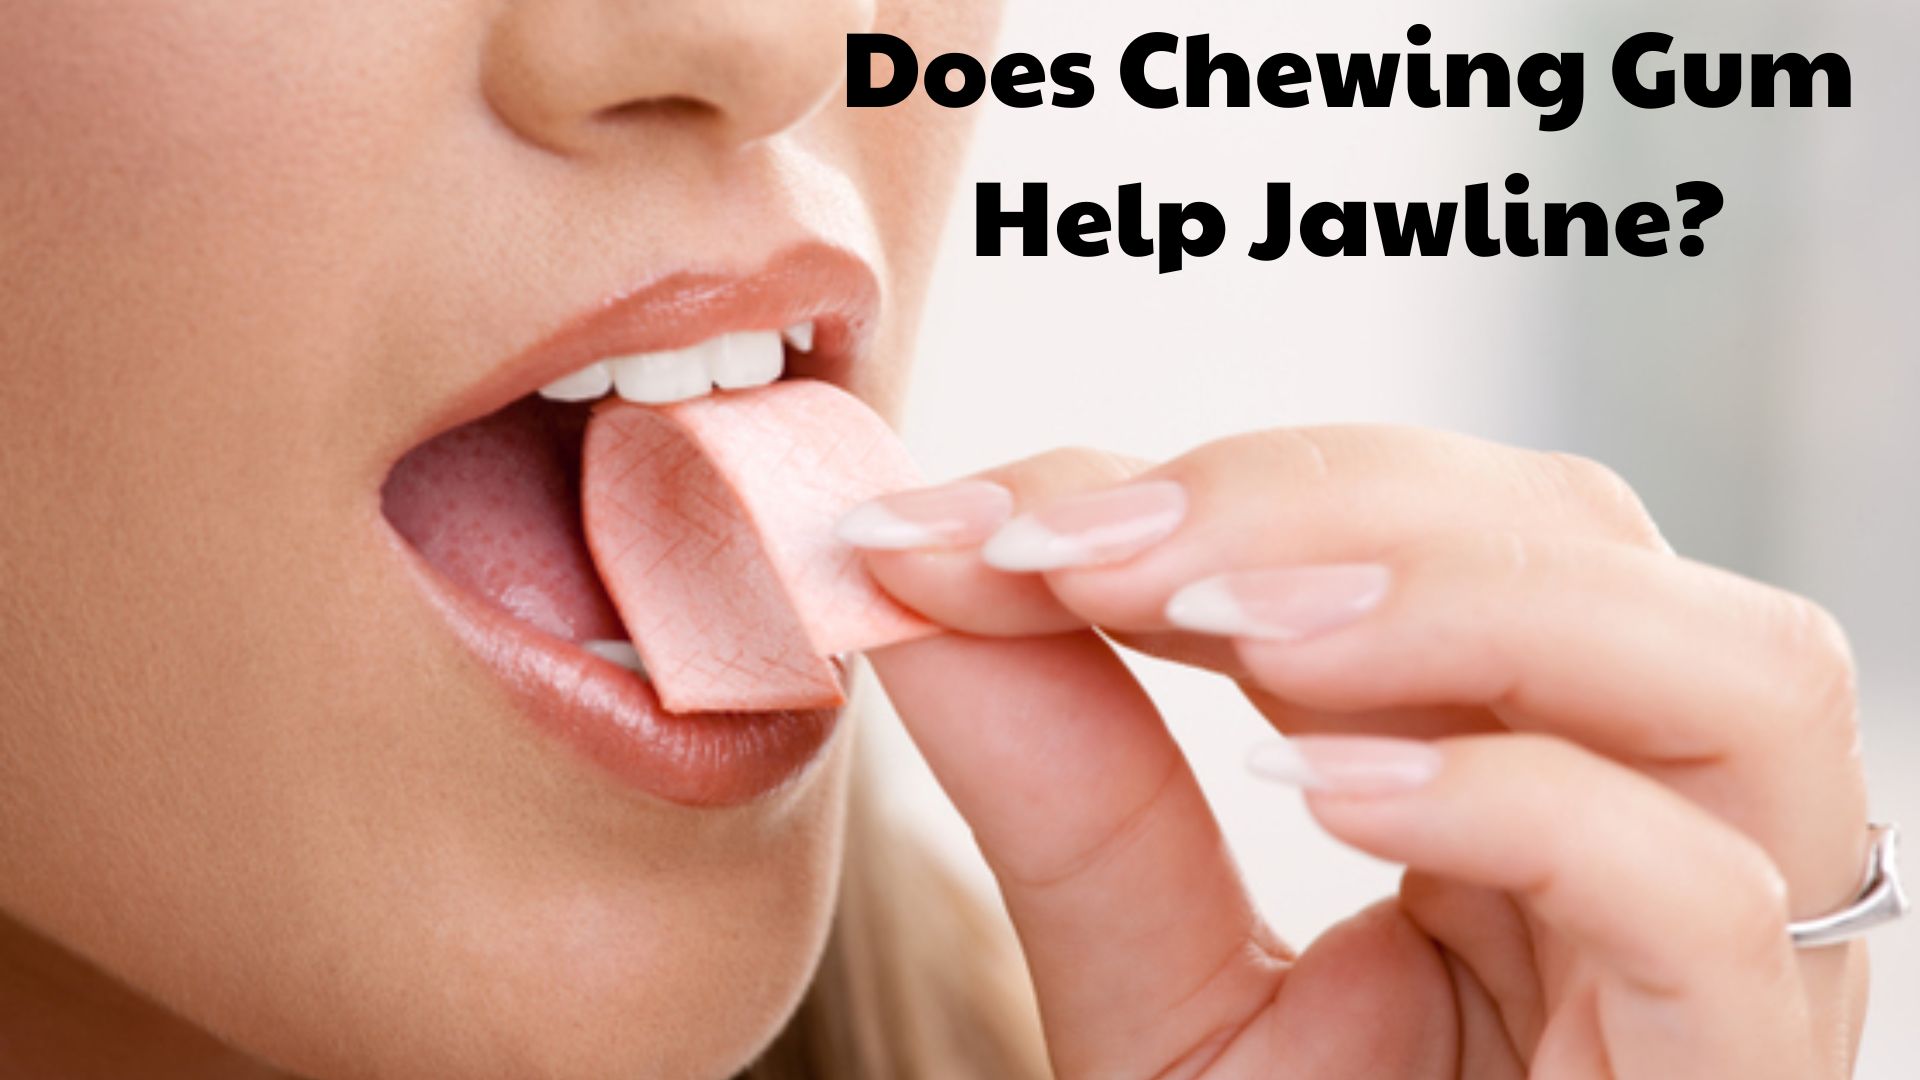 Does Chewing Gum Help Jawline? - special Jawline Chewing Gum